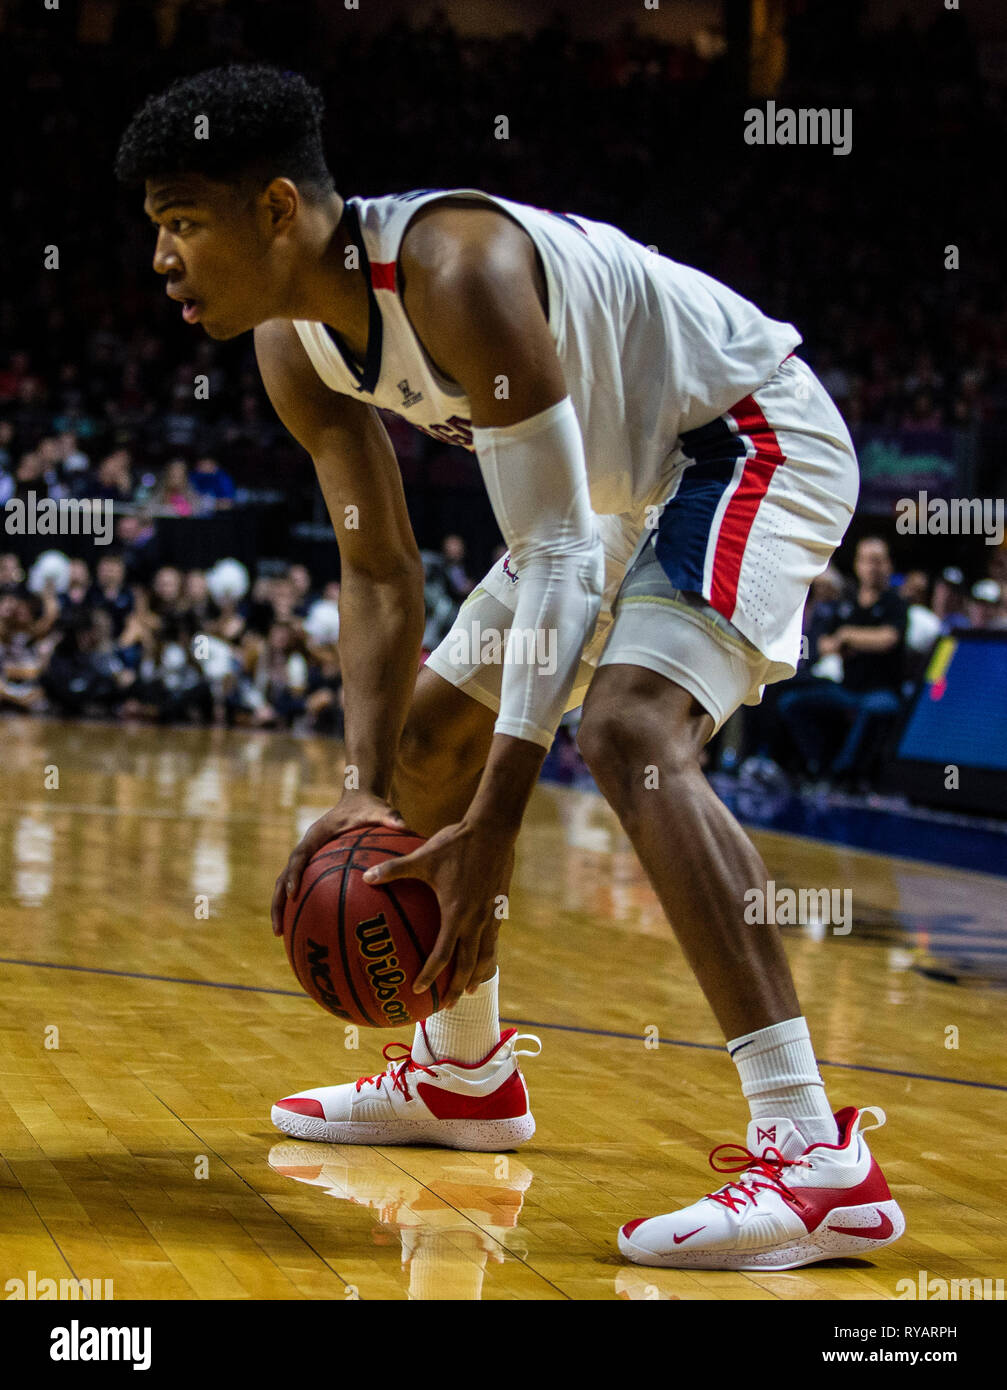 Mar 12 2019 Las Vegas, NV, U.S.A. Gonzaga forward Rui Hachimura (21)looks to pass the ball during the NCAA West Coast Conference Men's Basketball Tournament championship between the Gonzaga Bulldogs and the Saint Mary's Gaels 47-60 lost at Orleans Arena Las Vegas, NV. Thurman James/CSM Stock Photo